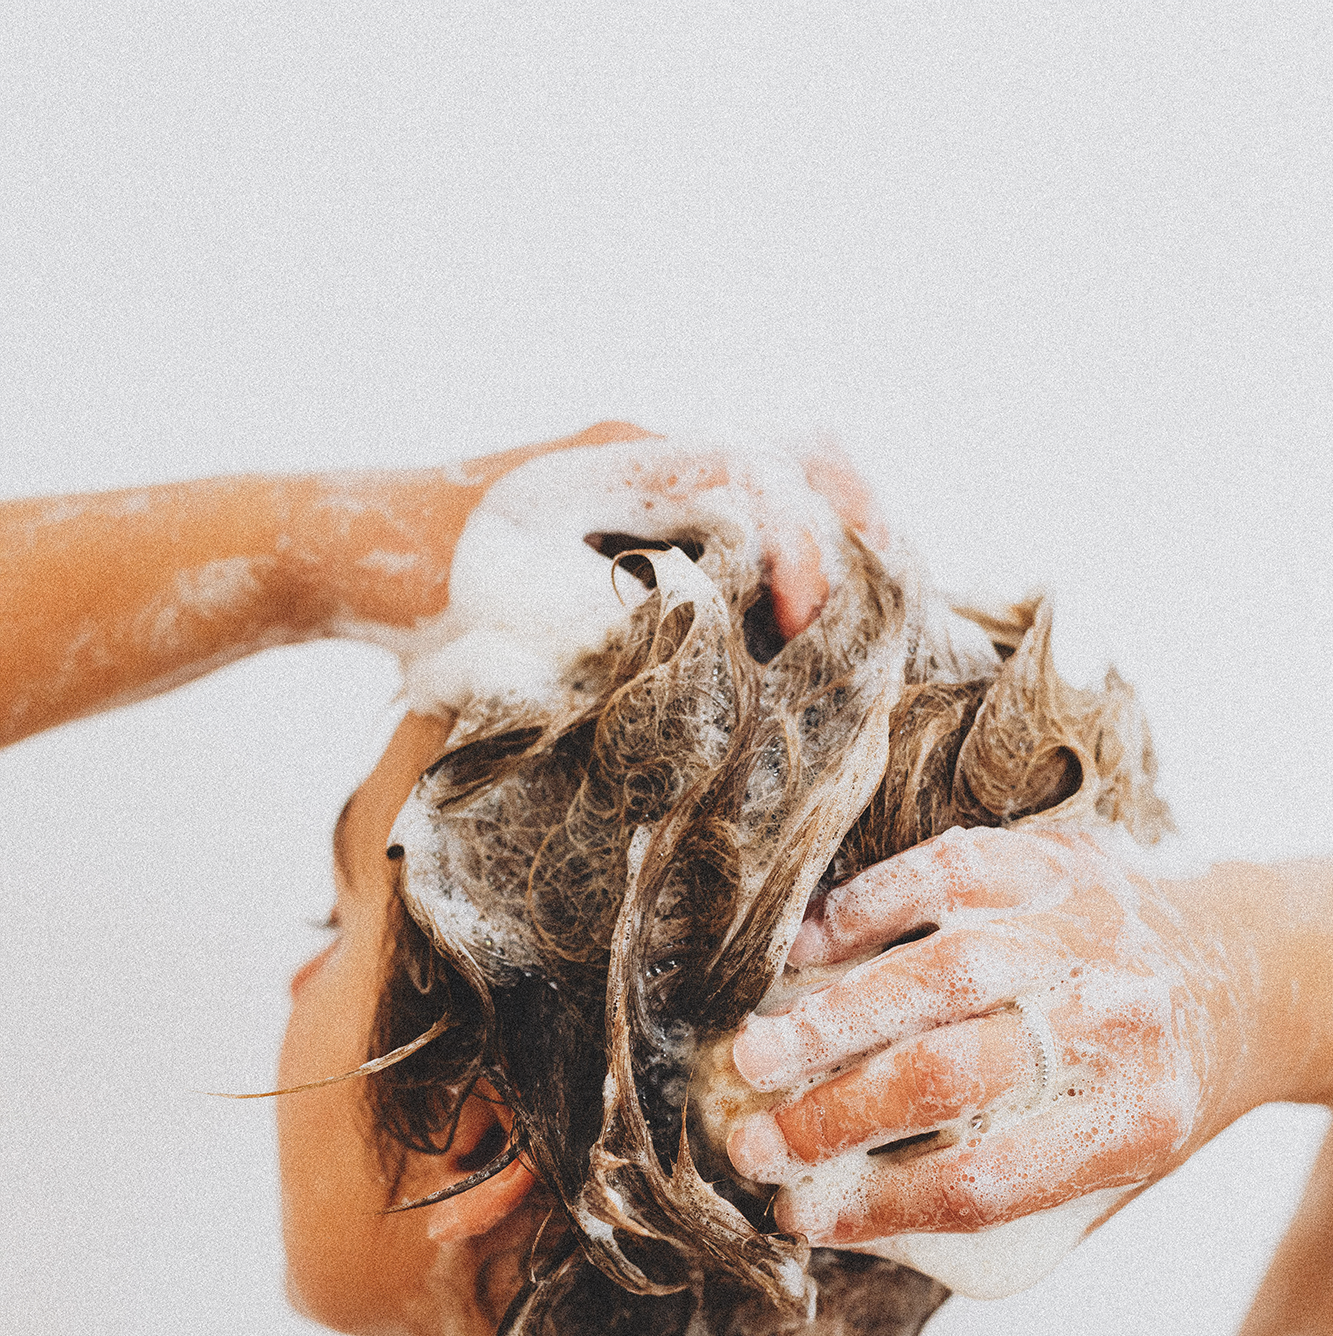 Got a Dry, Itchy Scalp? Check Out These Shampoos Rn